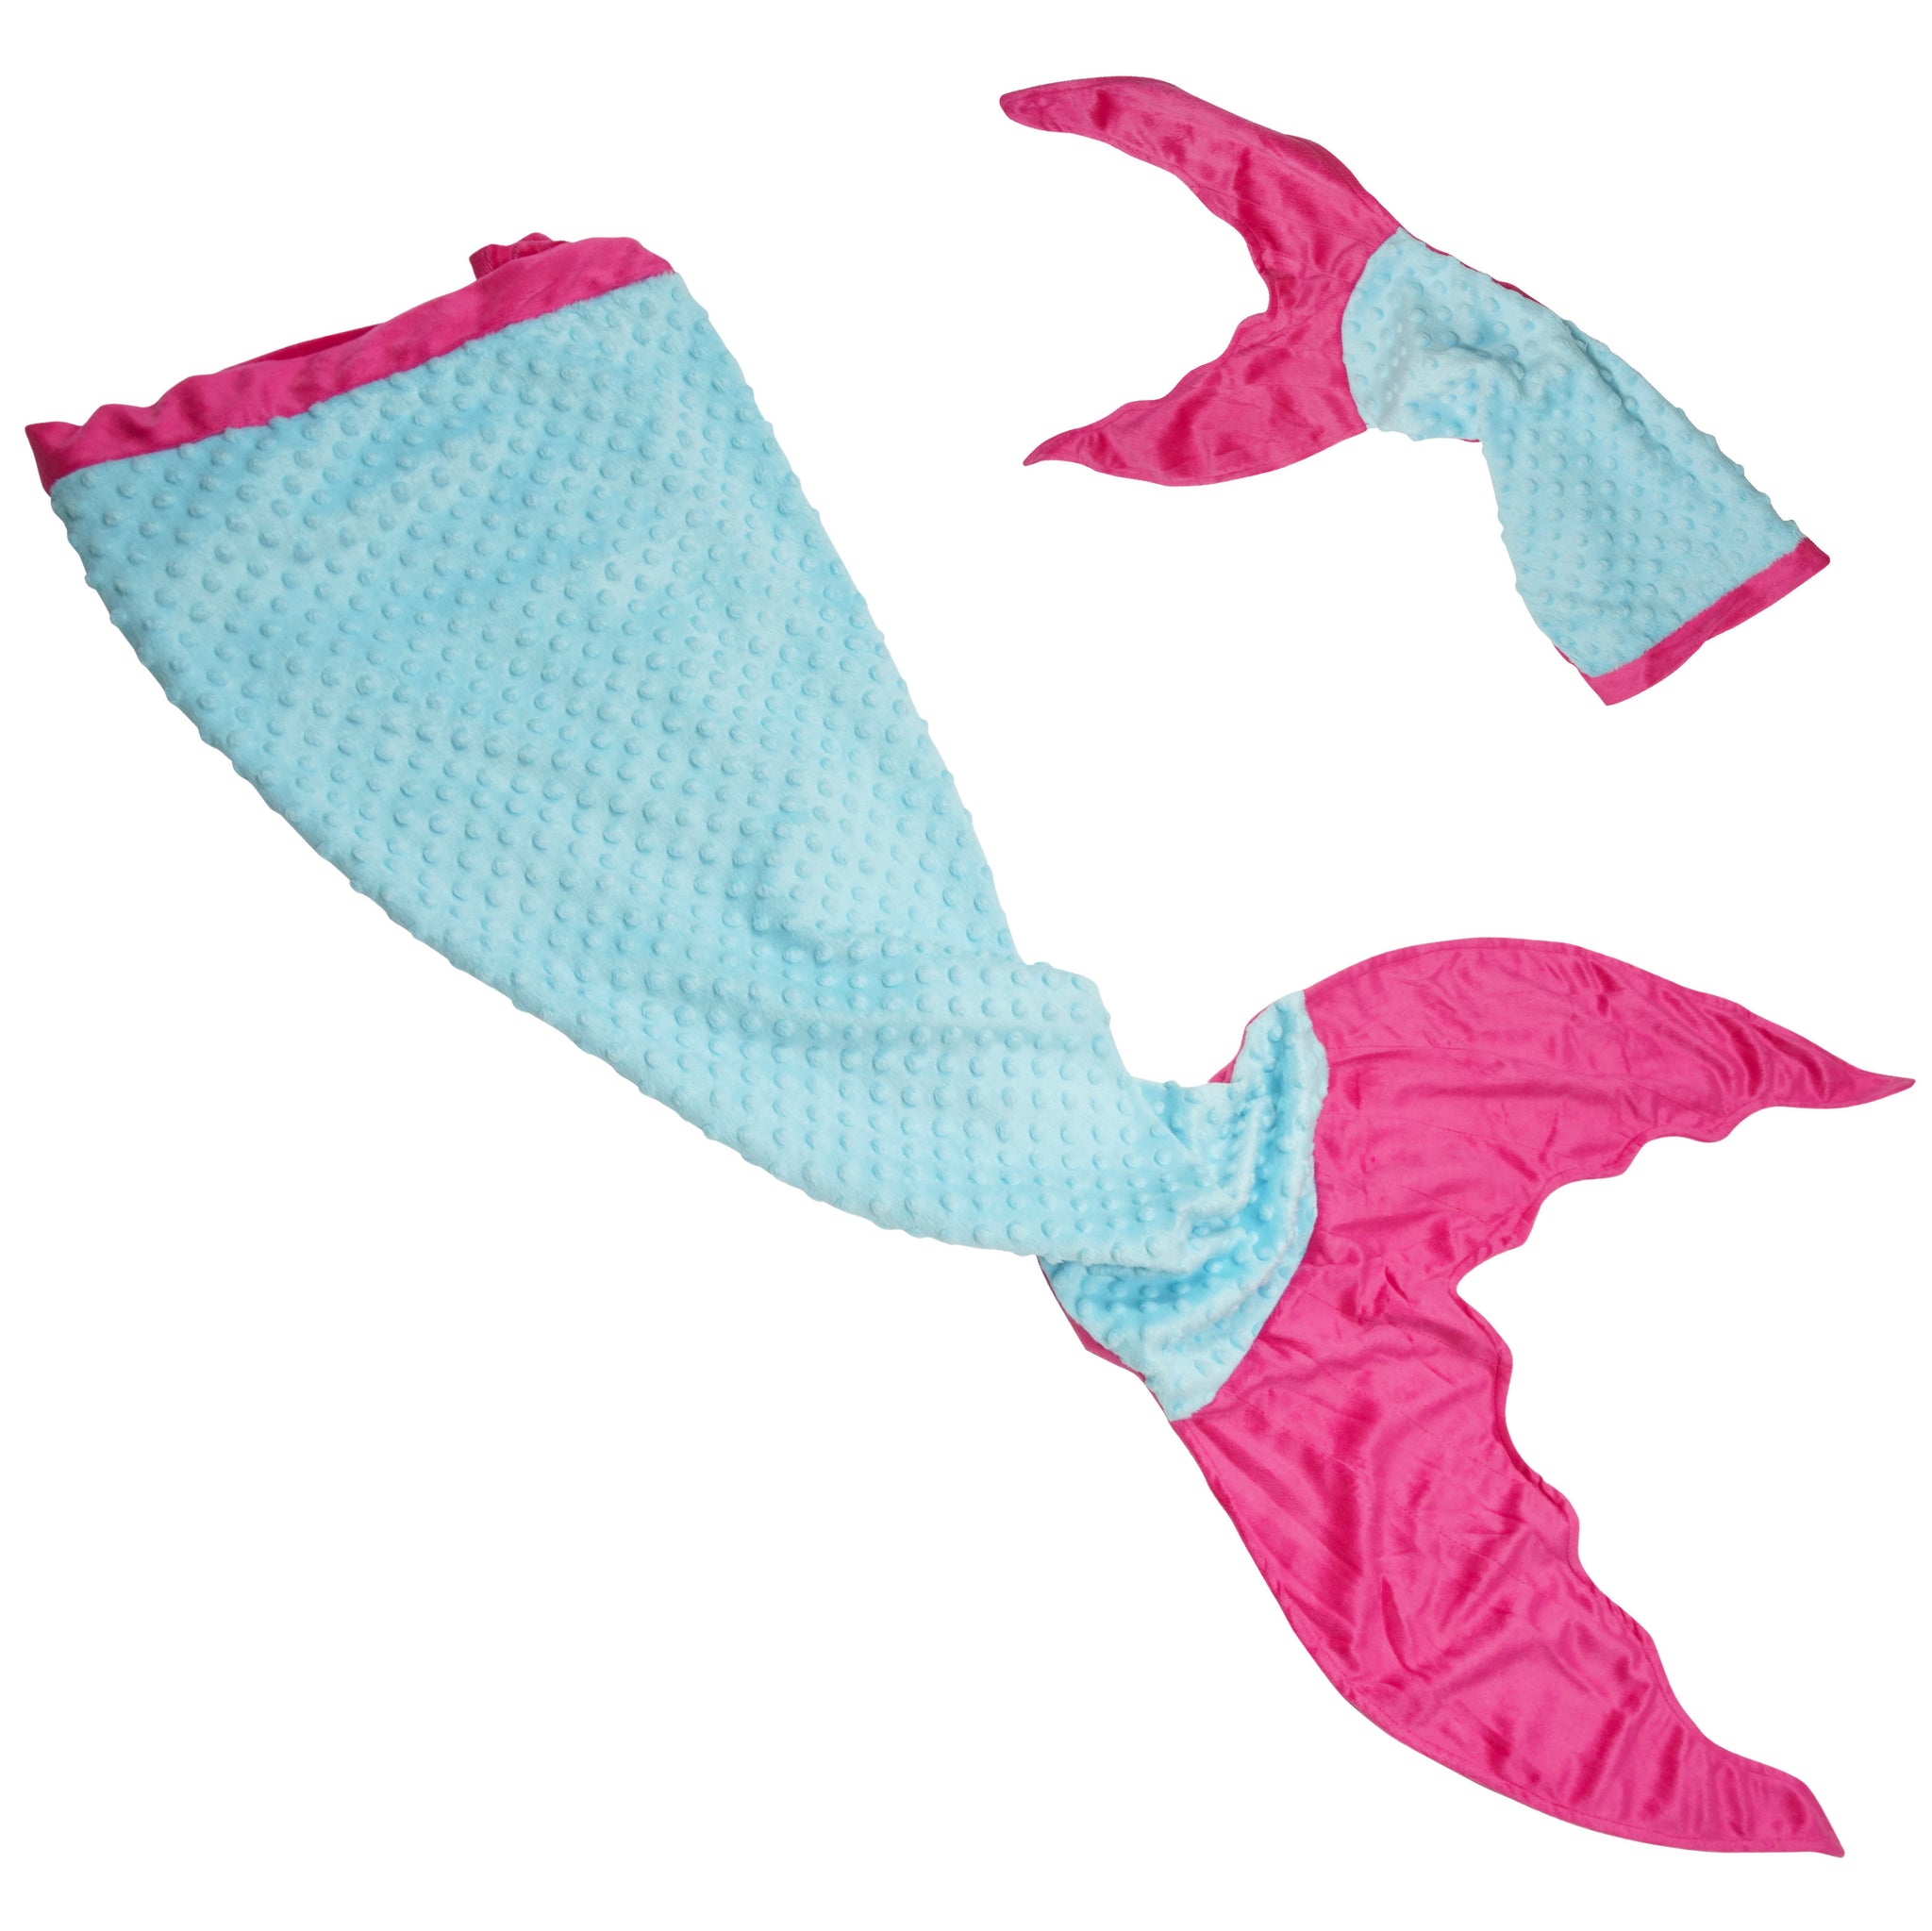 Mermaid Tail Blanket for Girls - Tuquoise (With Bonus Doll Blanket Included)